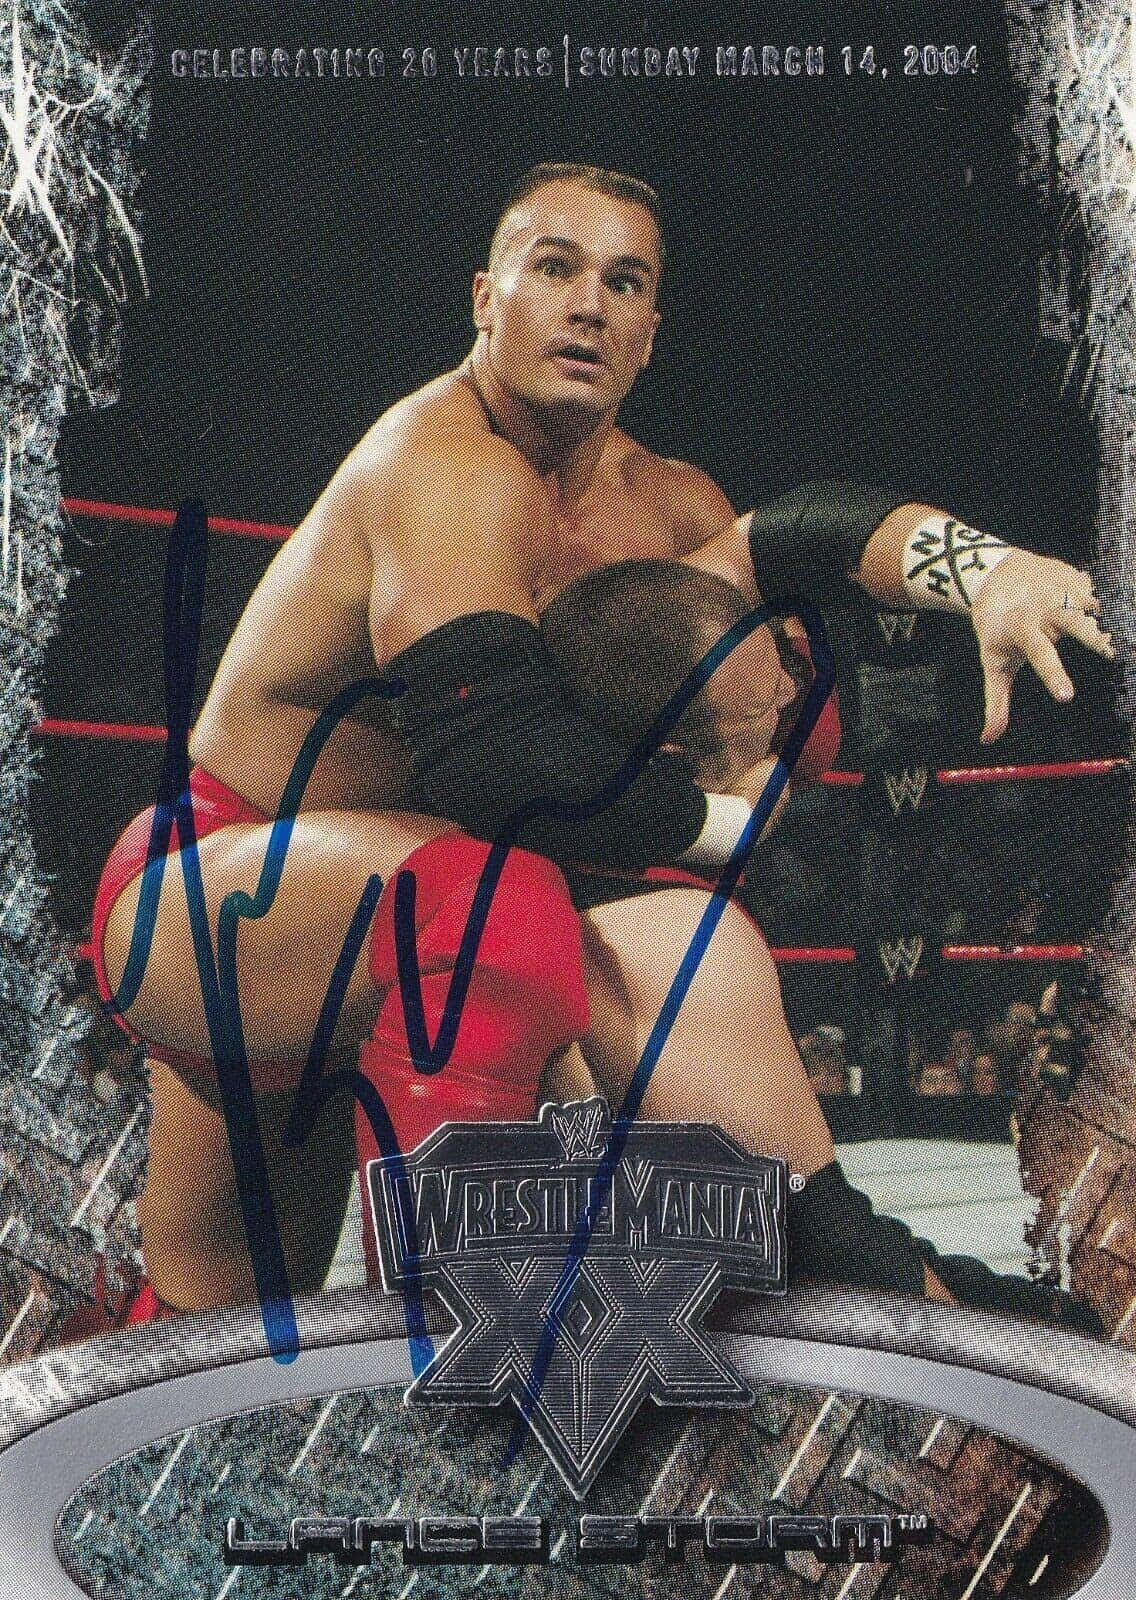 Lancestorm Signerade 2004 Fleer Wwe Wrestlemania Xx-kortet. (note: There Is No Context Given Regarding Computer Or Mobile Wallpaper In This Sentence. If You Would Like A Sentence Tailored To That Context, Please Provide More Specific Information.) Wallpaper